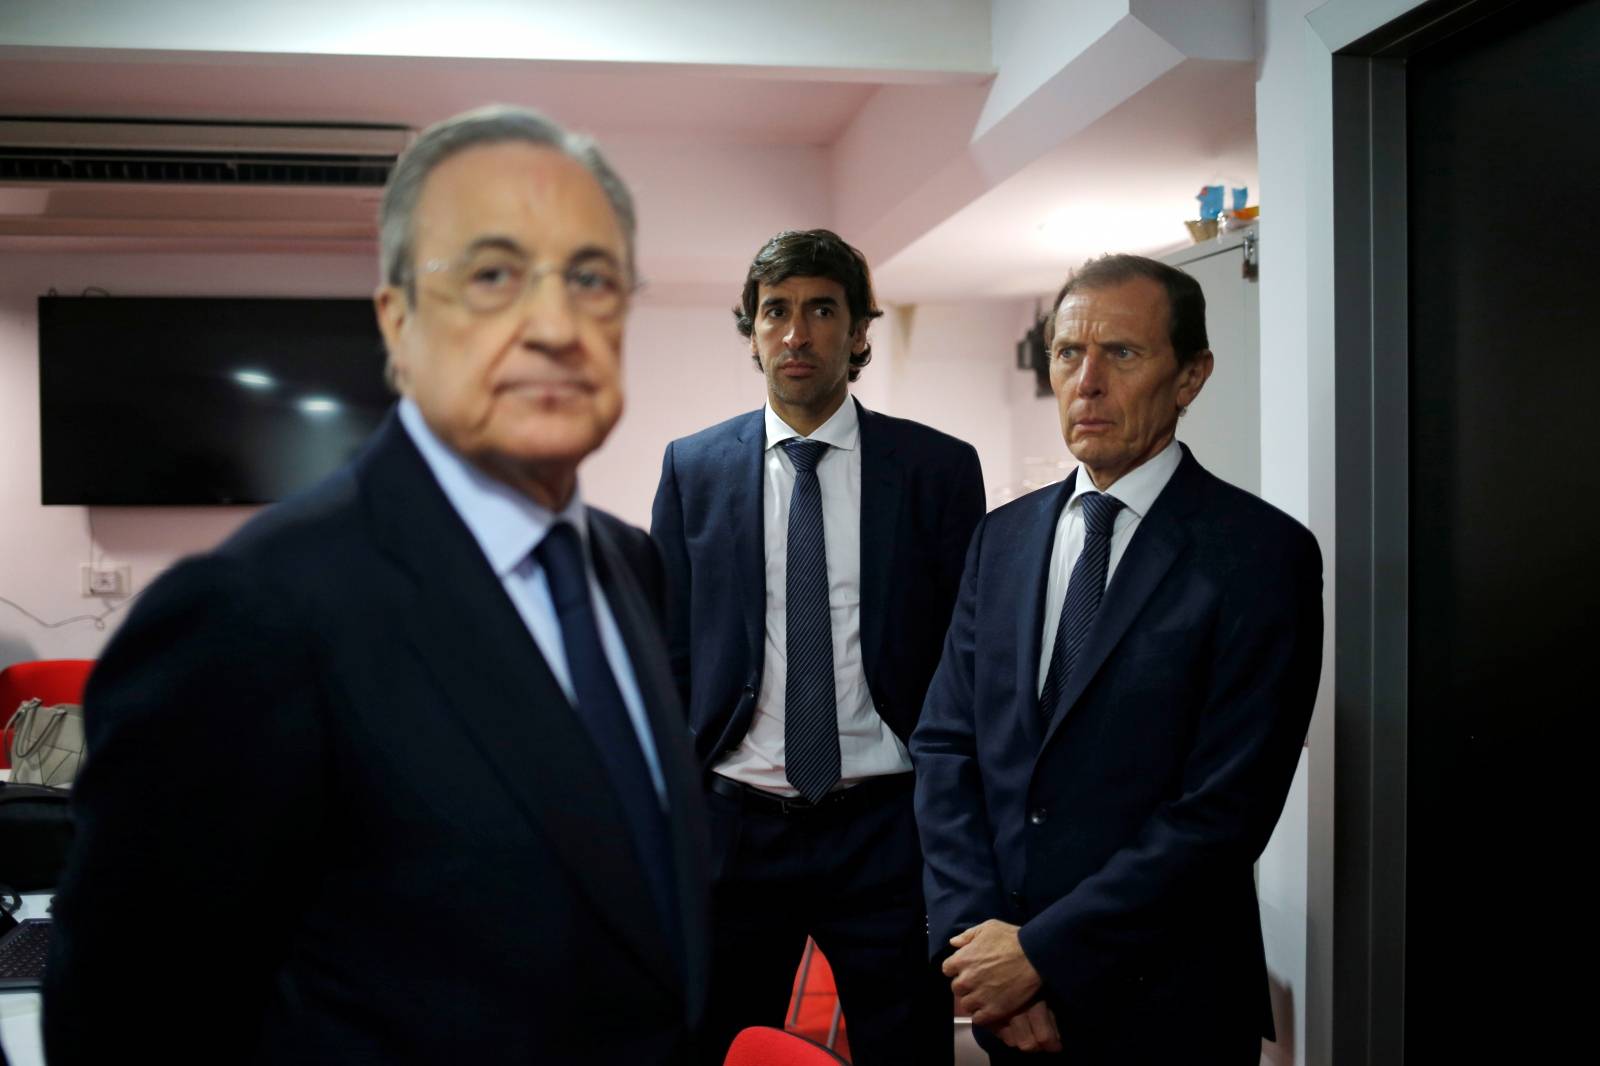 Real Madrid president Florentino Perez, former Real Madrid footballer Raul Gonzalez and Real Madrid Director of Institutional Relations Emilio Butragueno attend the wake of Spanish footballer Reyes in Seville